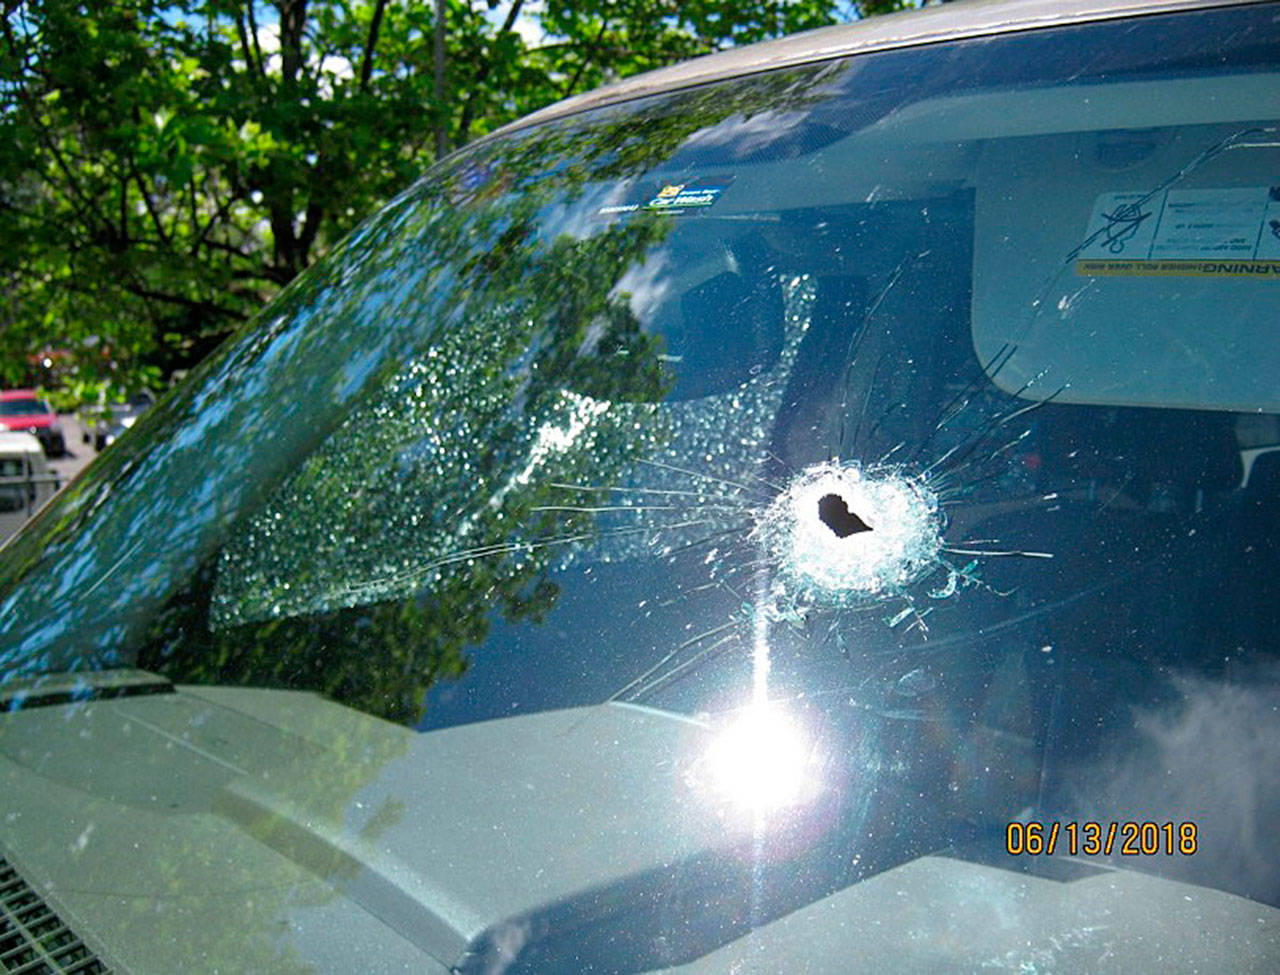 One of four vehicles hit by gunshots on Wednesday, June 13, along State Route 509 near Burien and SeaTac. COURTESY PHOTO, State Patrol